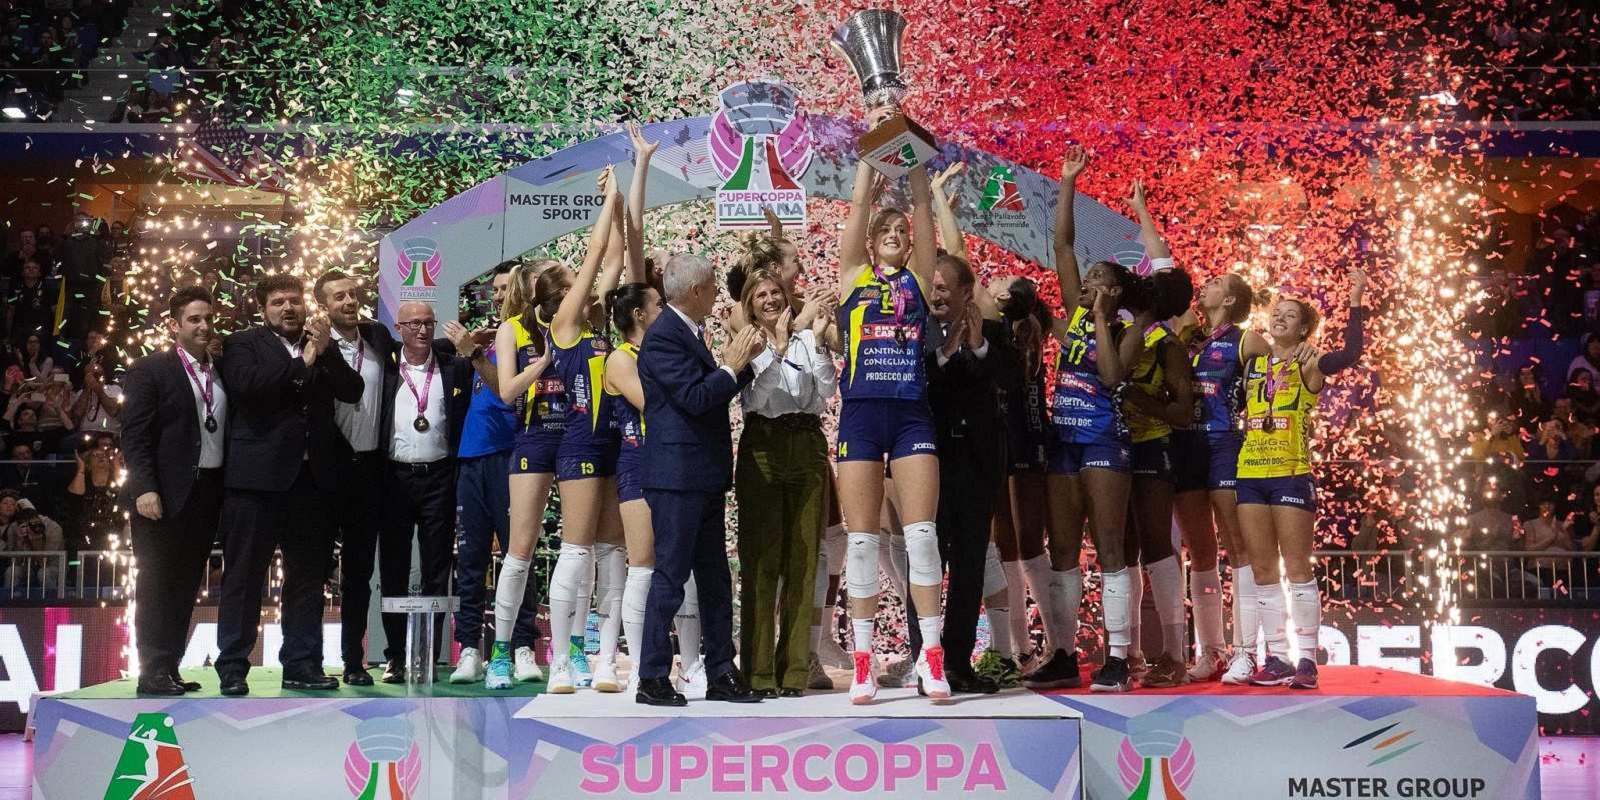 FEMALE VOLLEYBALL “SERIE A” LEAGUE